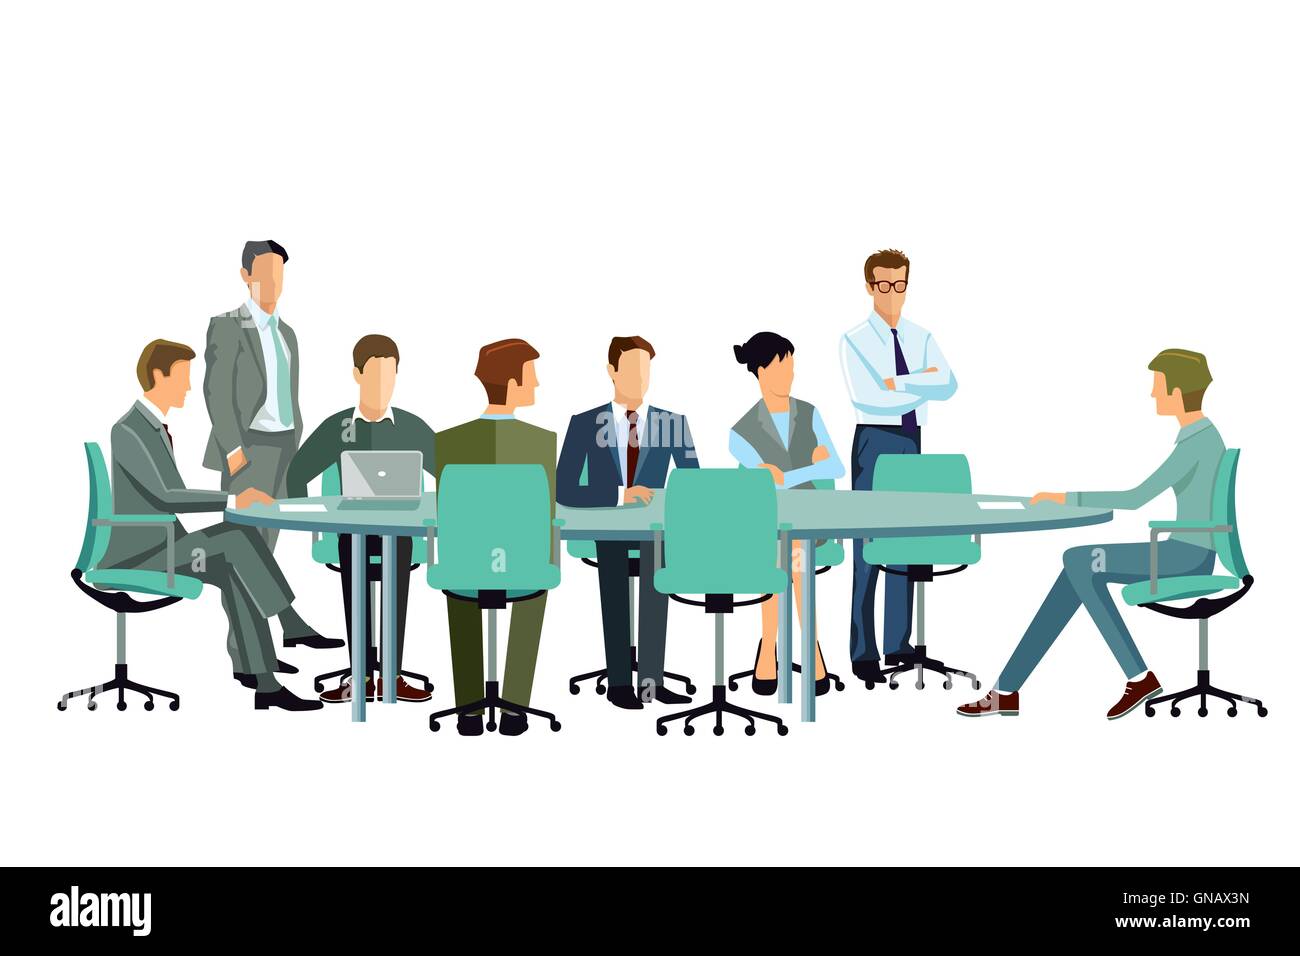 Meeting in the group Stock Vector